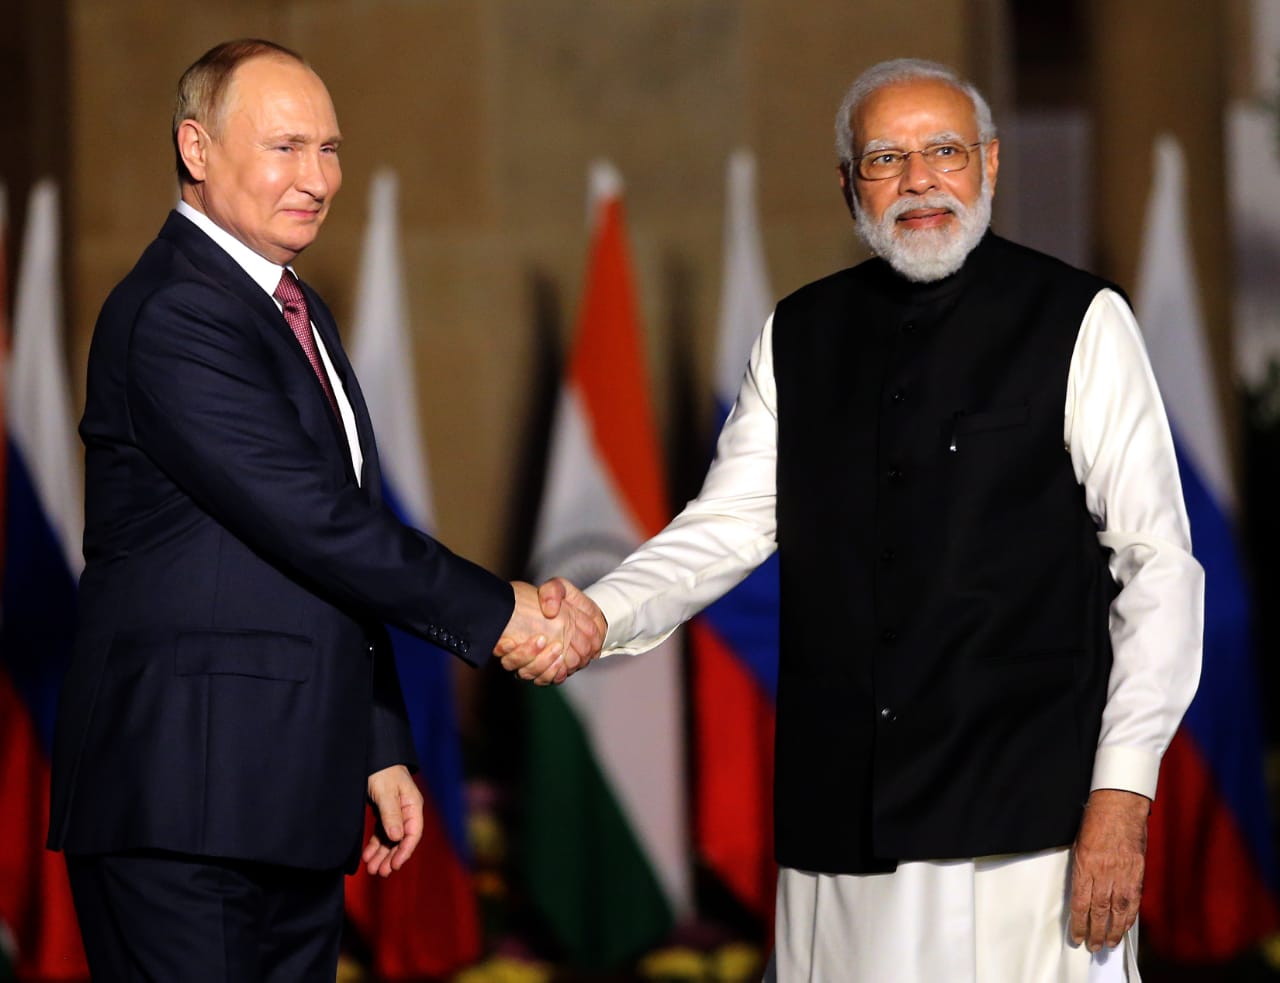 Russian President Lauds India's Contribution To "Ensuring International Stability"